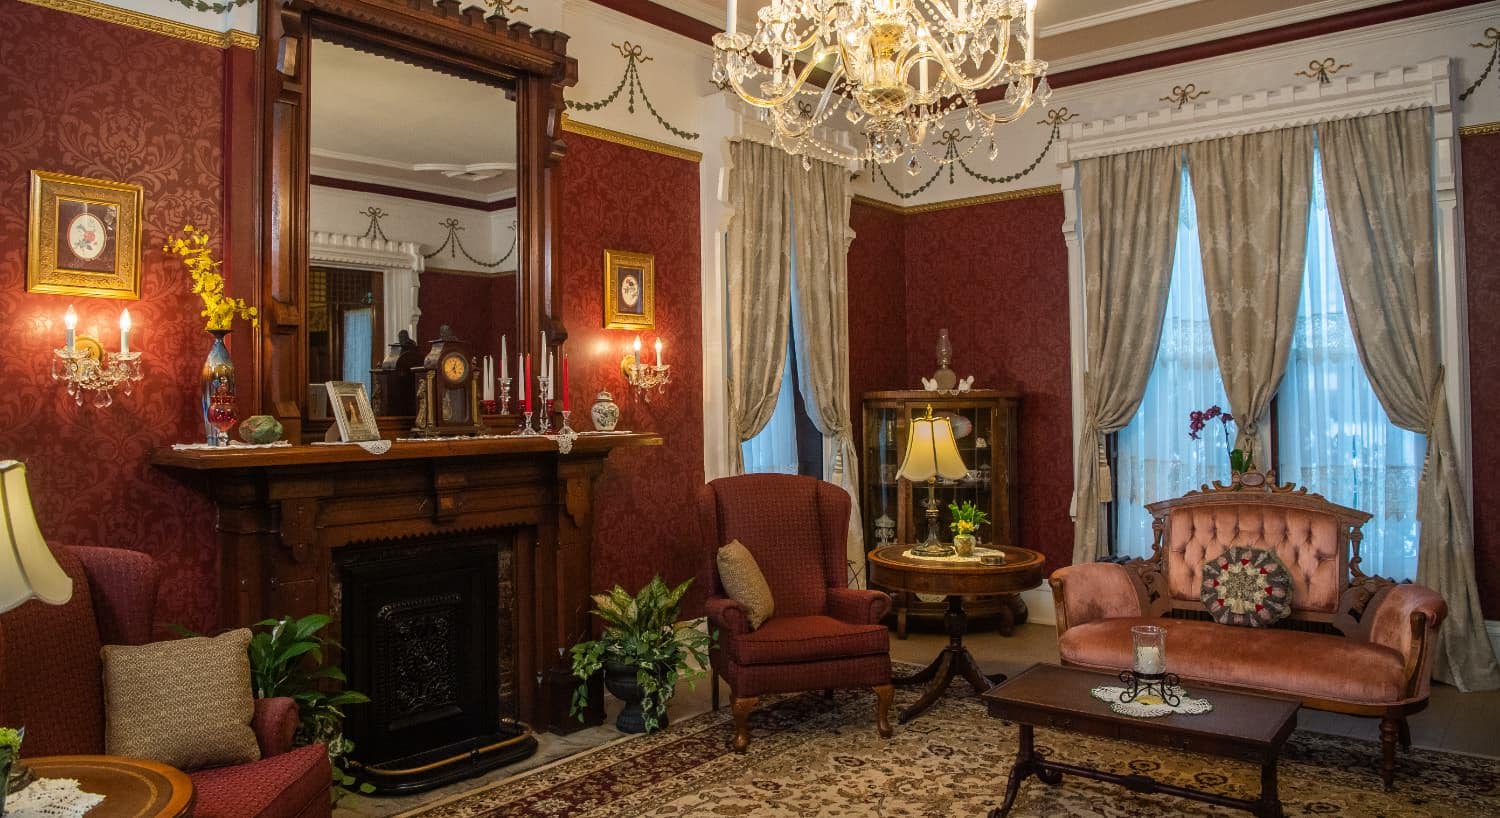 Large room with ornate burgundy wall paper, tall ceilings, large windows with drapery, red upholstered armchairs, and antique fireplace with wooden mantel and large mirror